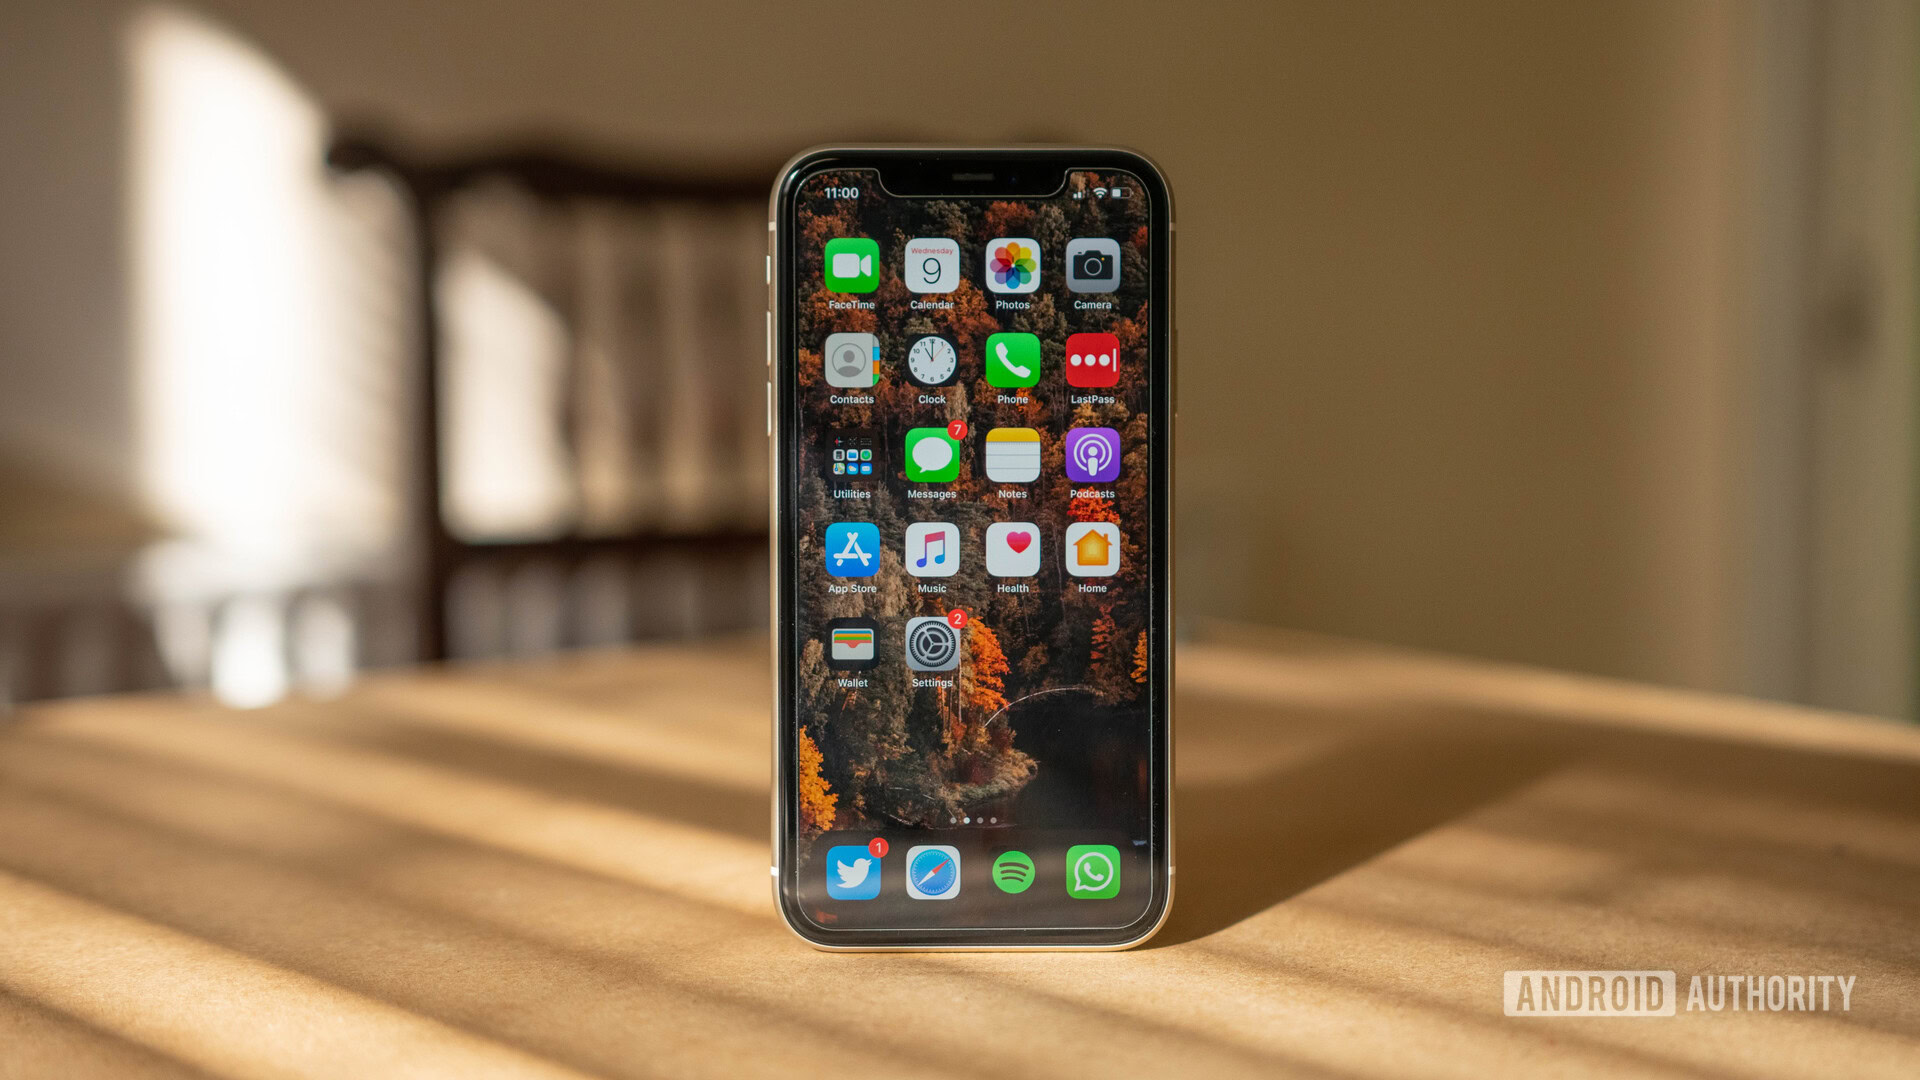 iPhone 11 Pro Review: Two months with the finest iPhone yet?